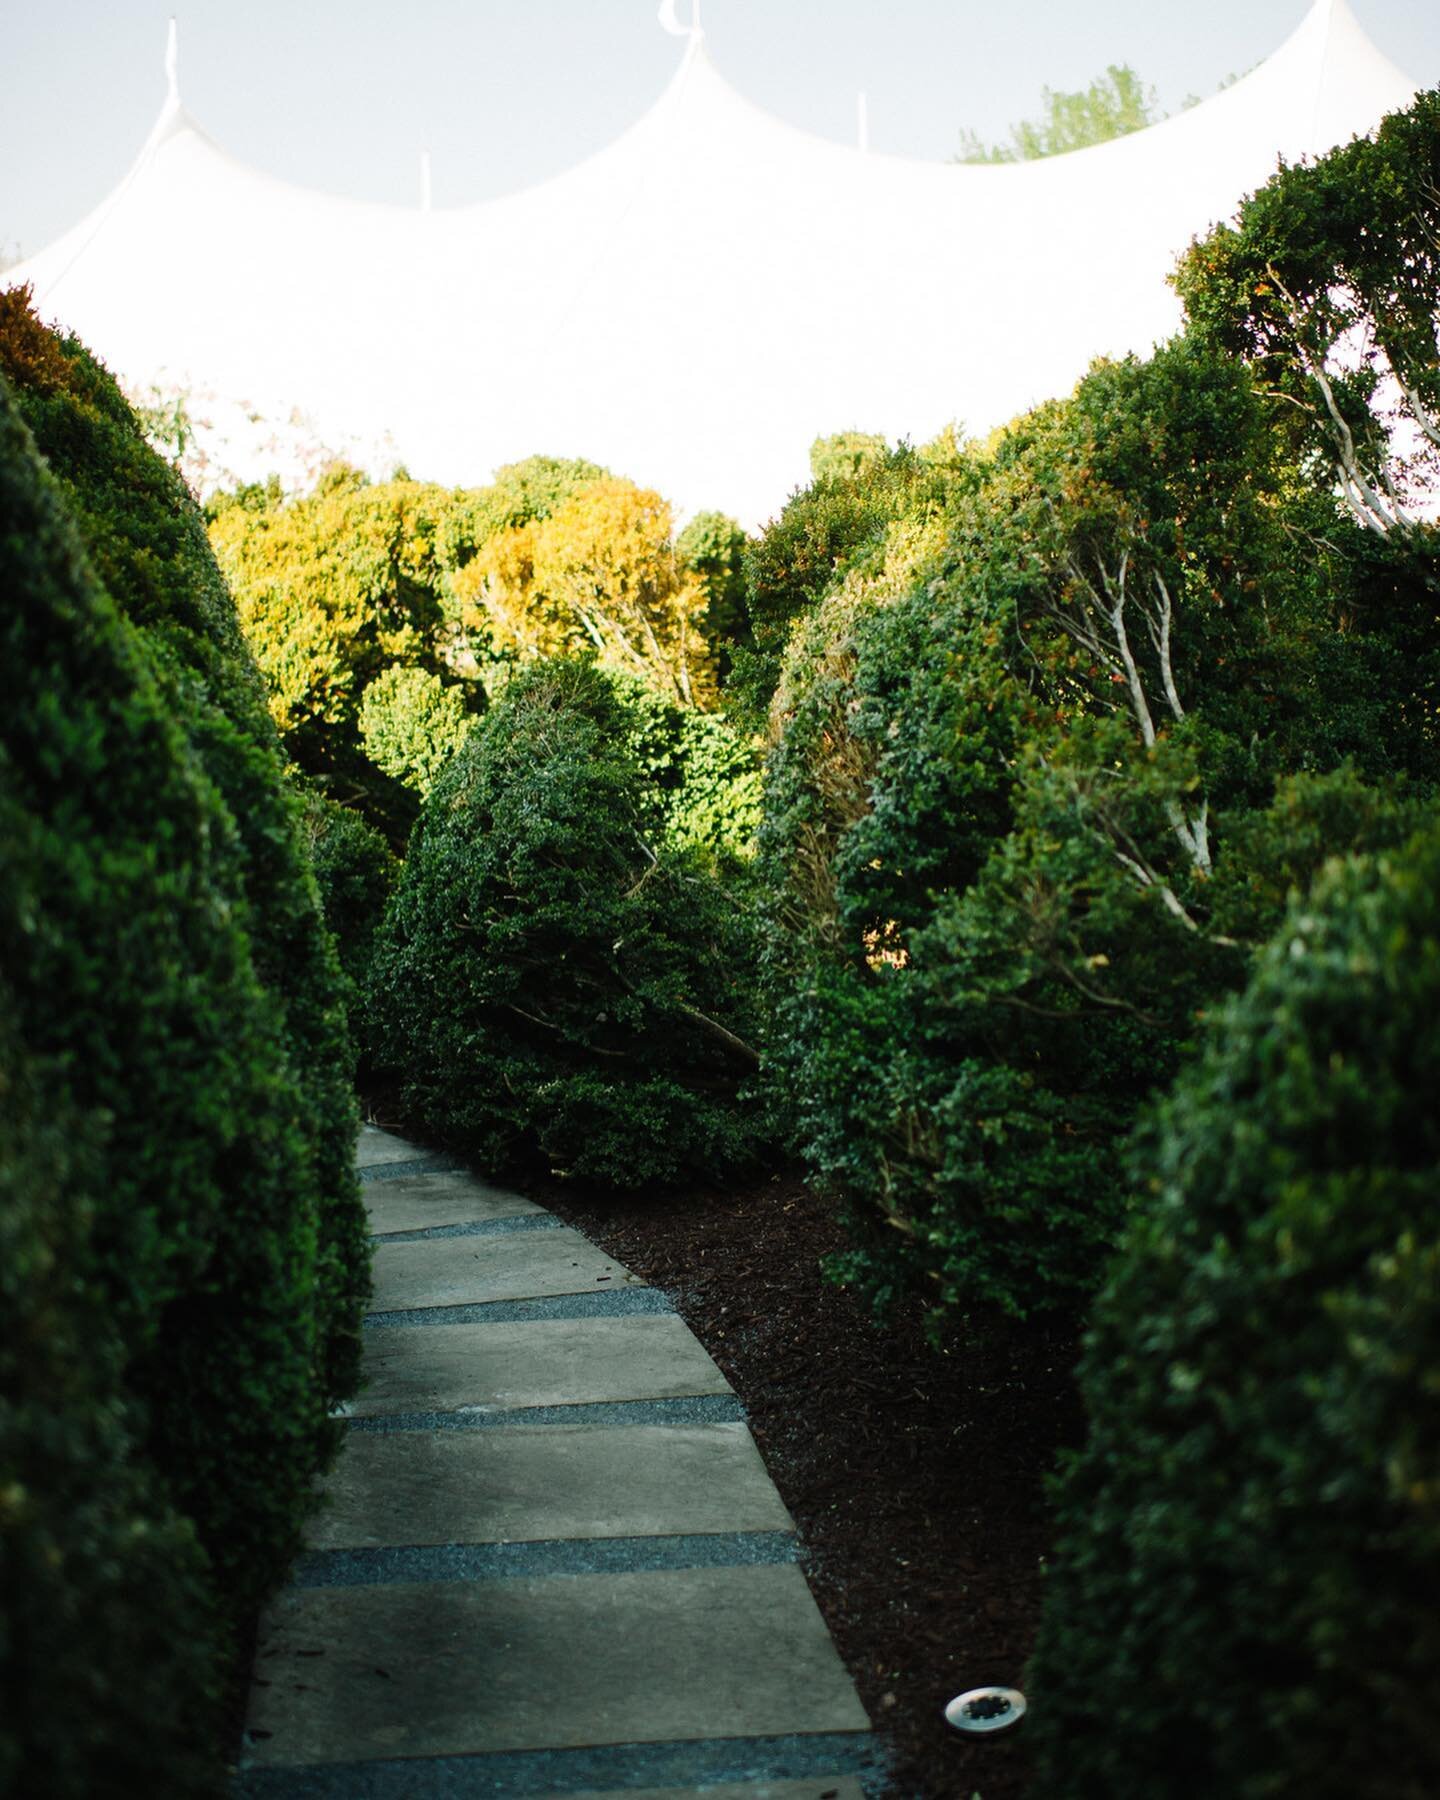 Follow the boxwood maze to the sailcloth tent for the reception&hellip;the instructions our team gave guests as they entered Adrianna and Adam's tented, home wedding reception.  We kept it a surprise that as guests found the sailcloth tent, they woul